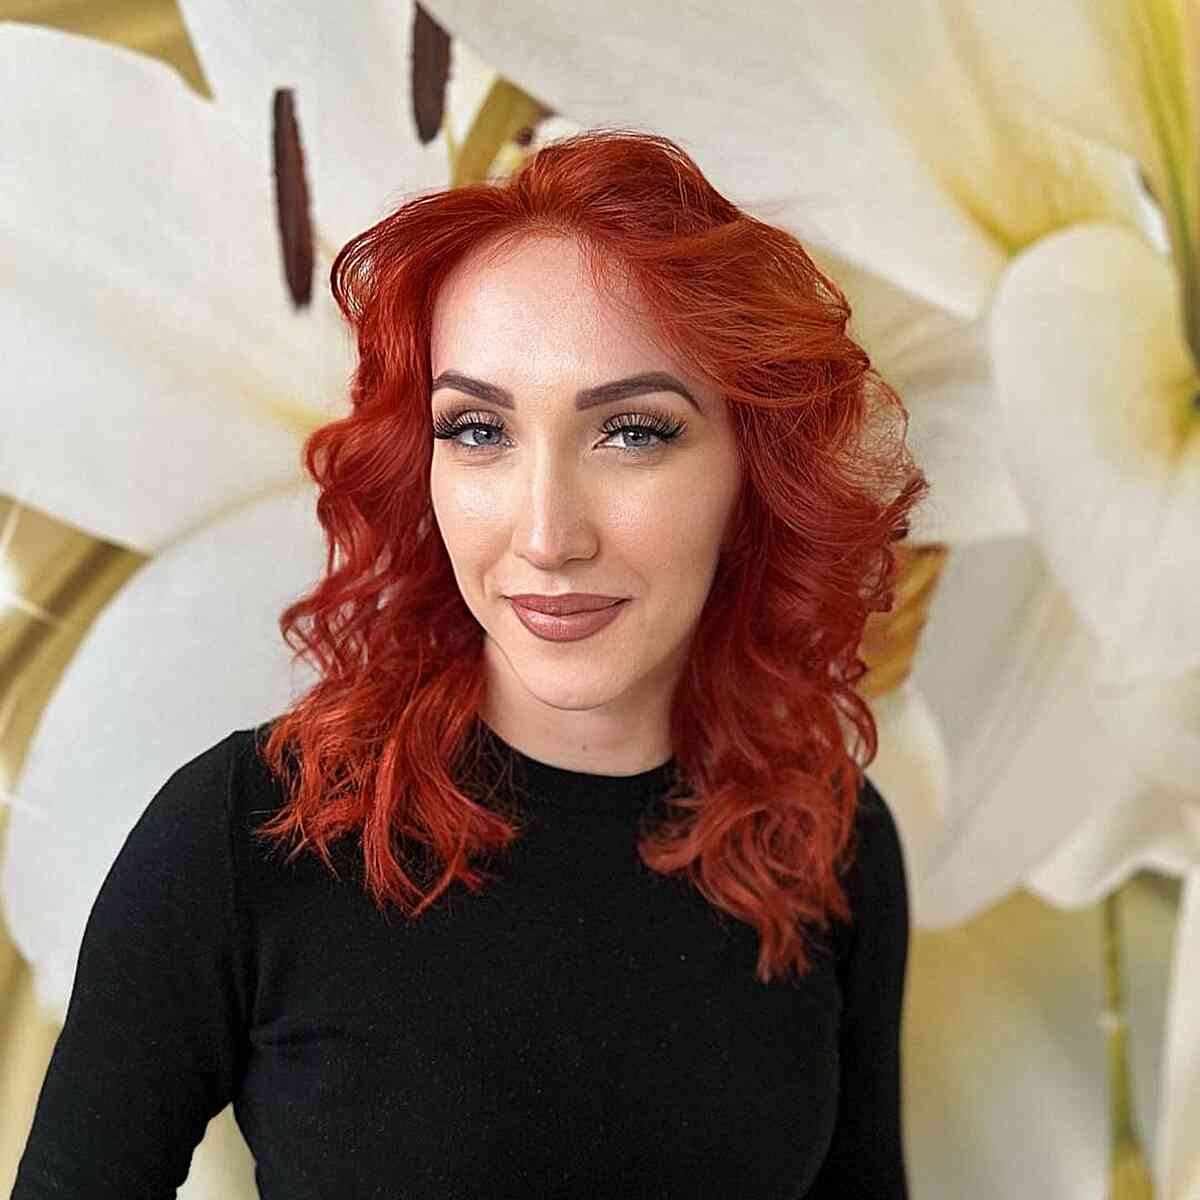 Fiery Red Curled Hair for Long Faces and for women with an edgy style